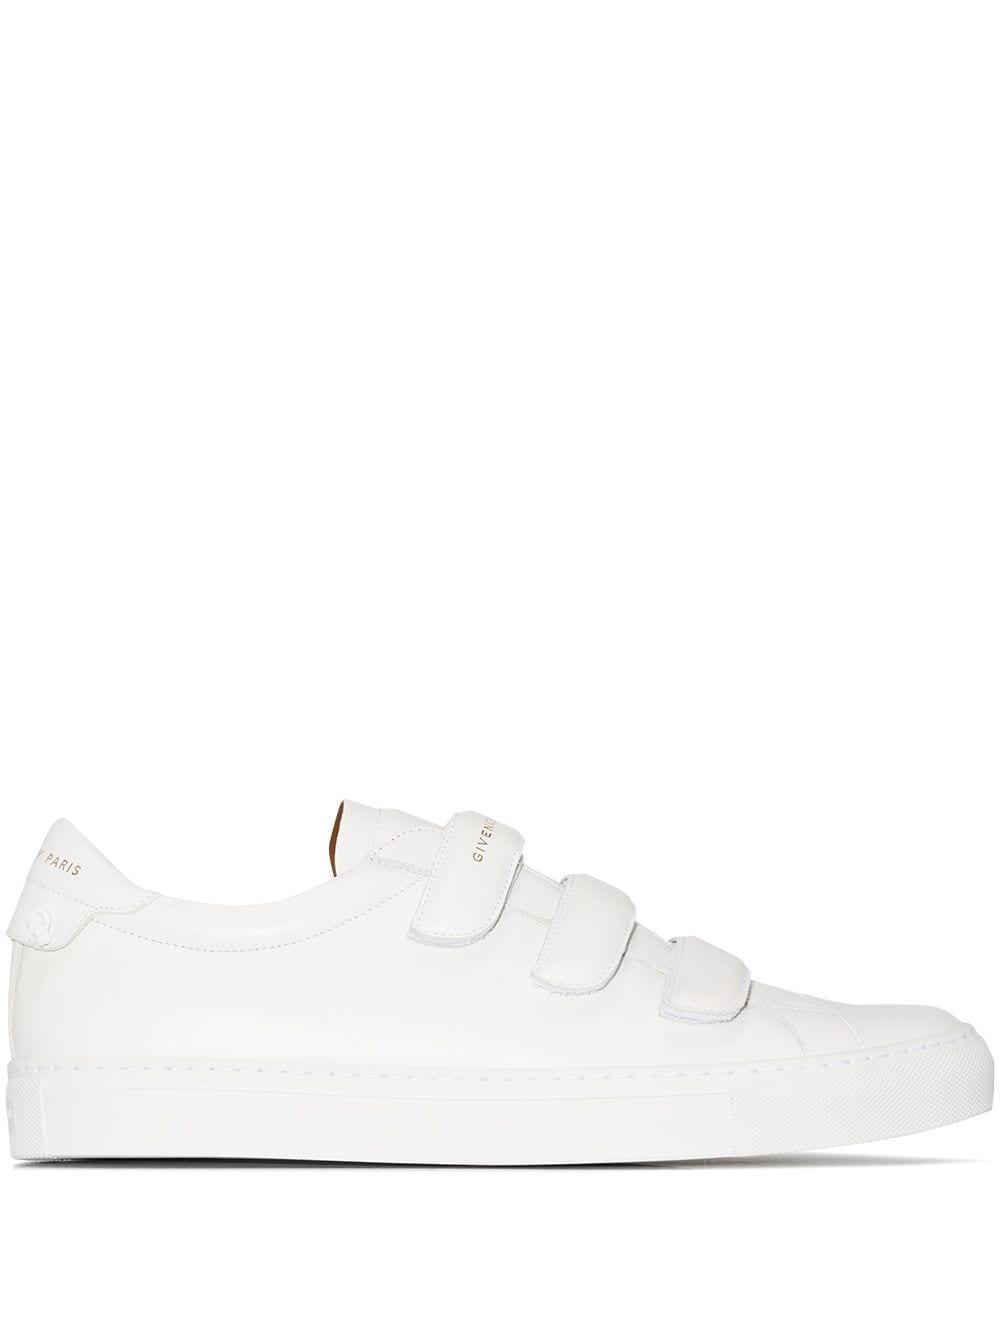 Givenchy Urban Street Velcro Strap Sneakers in White for Men | Lyst